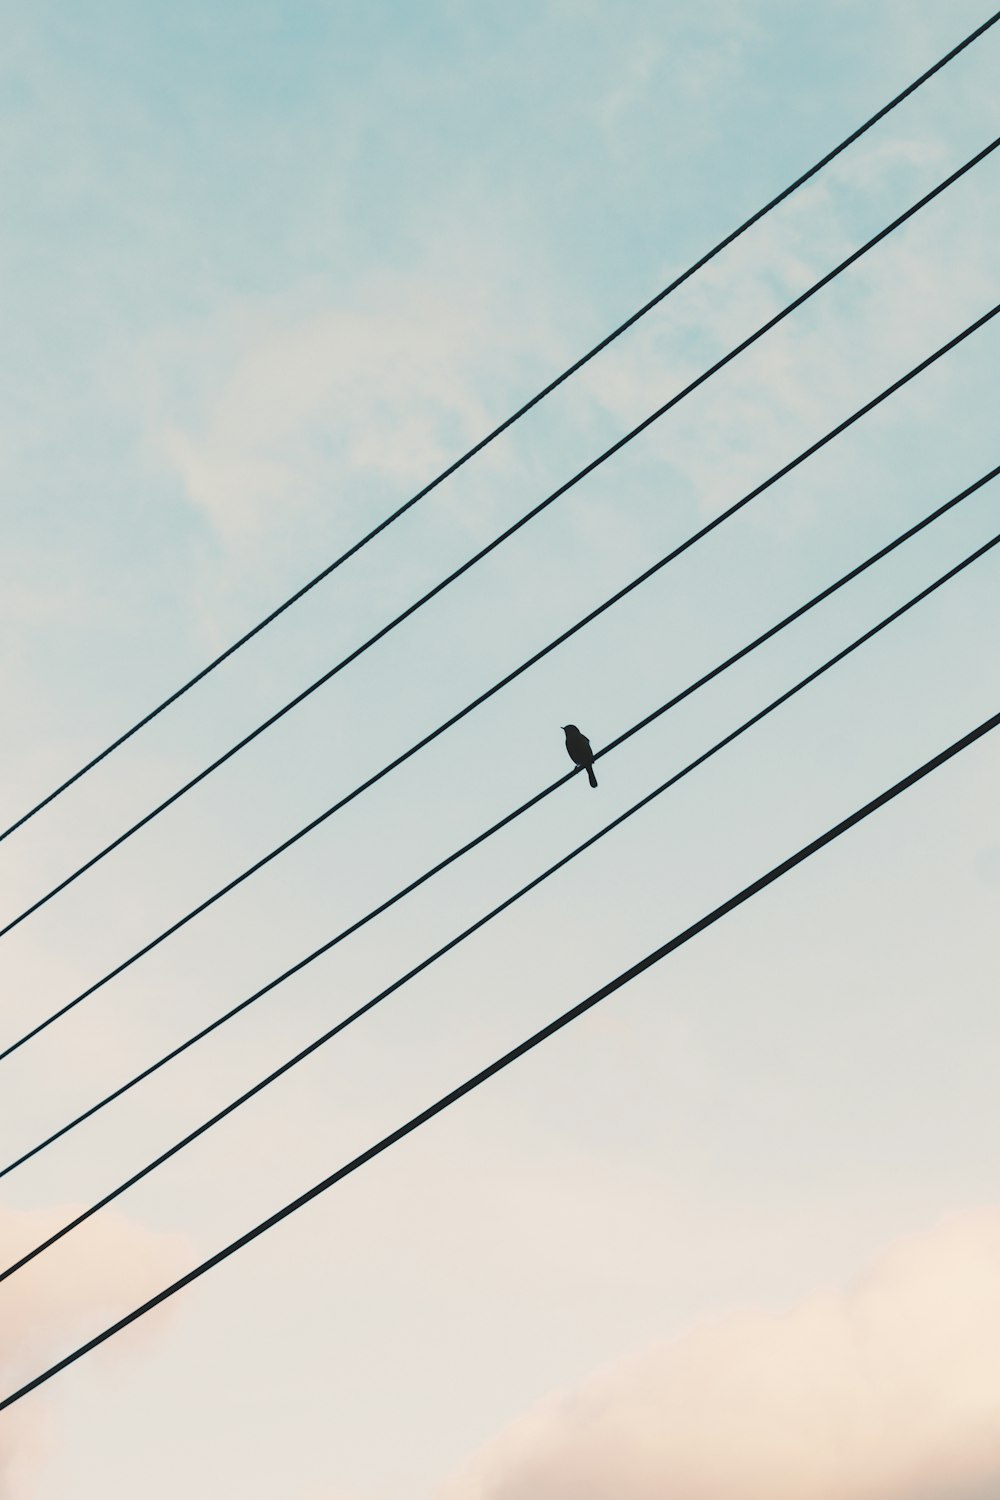 black bird on electric wire under blue sky during daytime